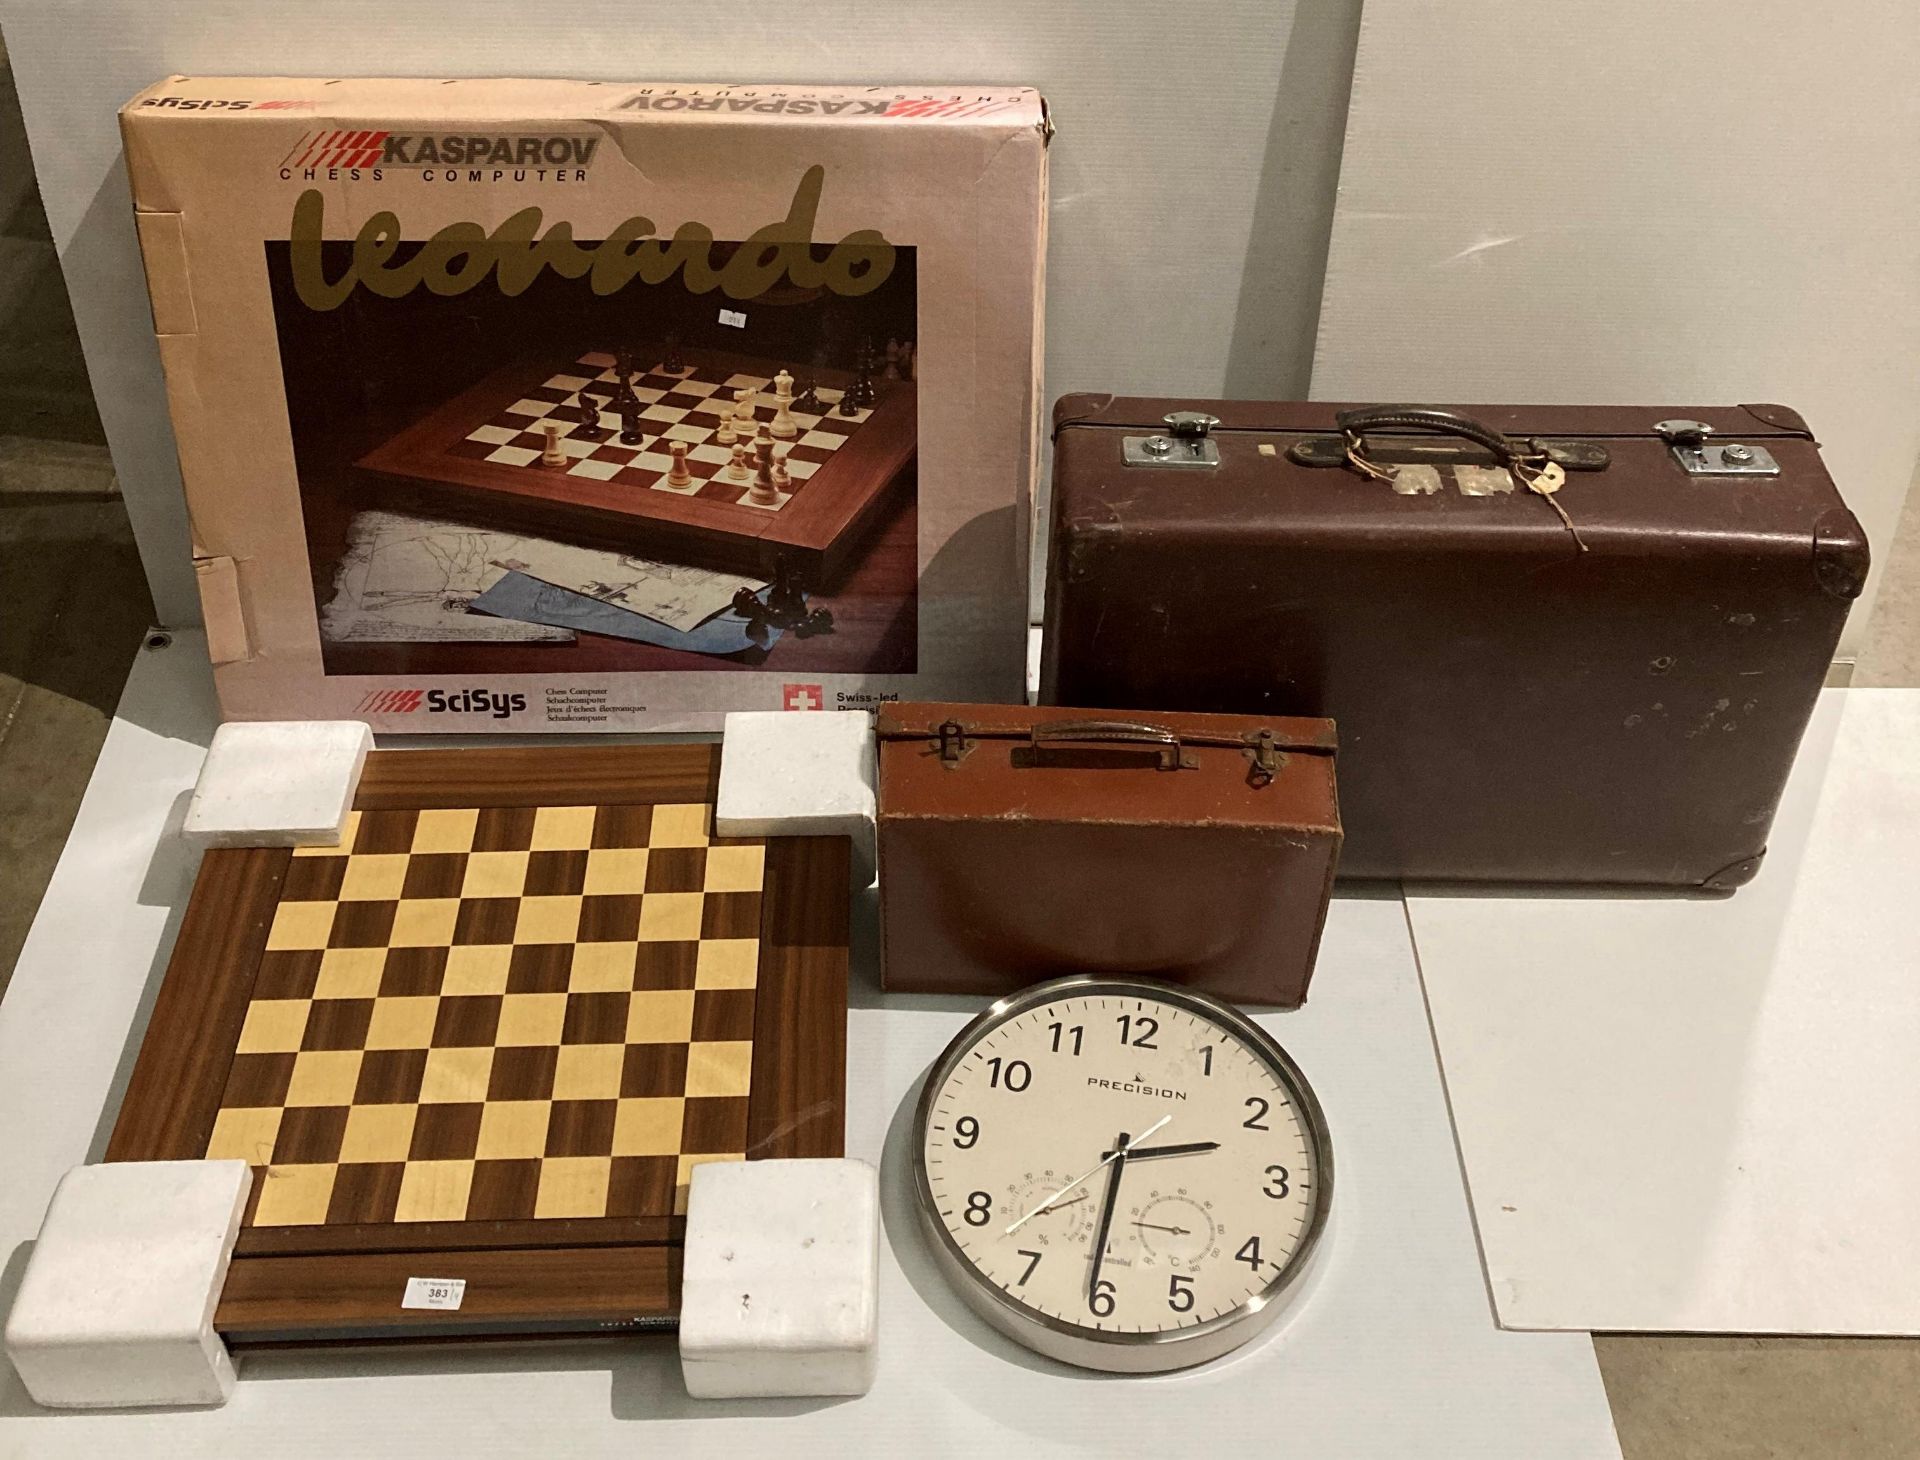 A SCISYS Leonardo Kasperov chess computer bound in box but no leads or pieces,